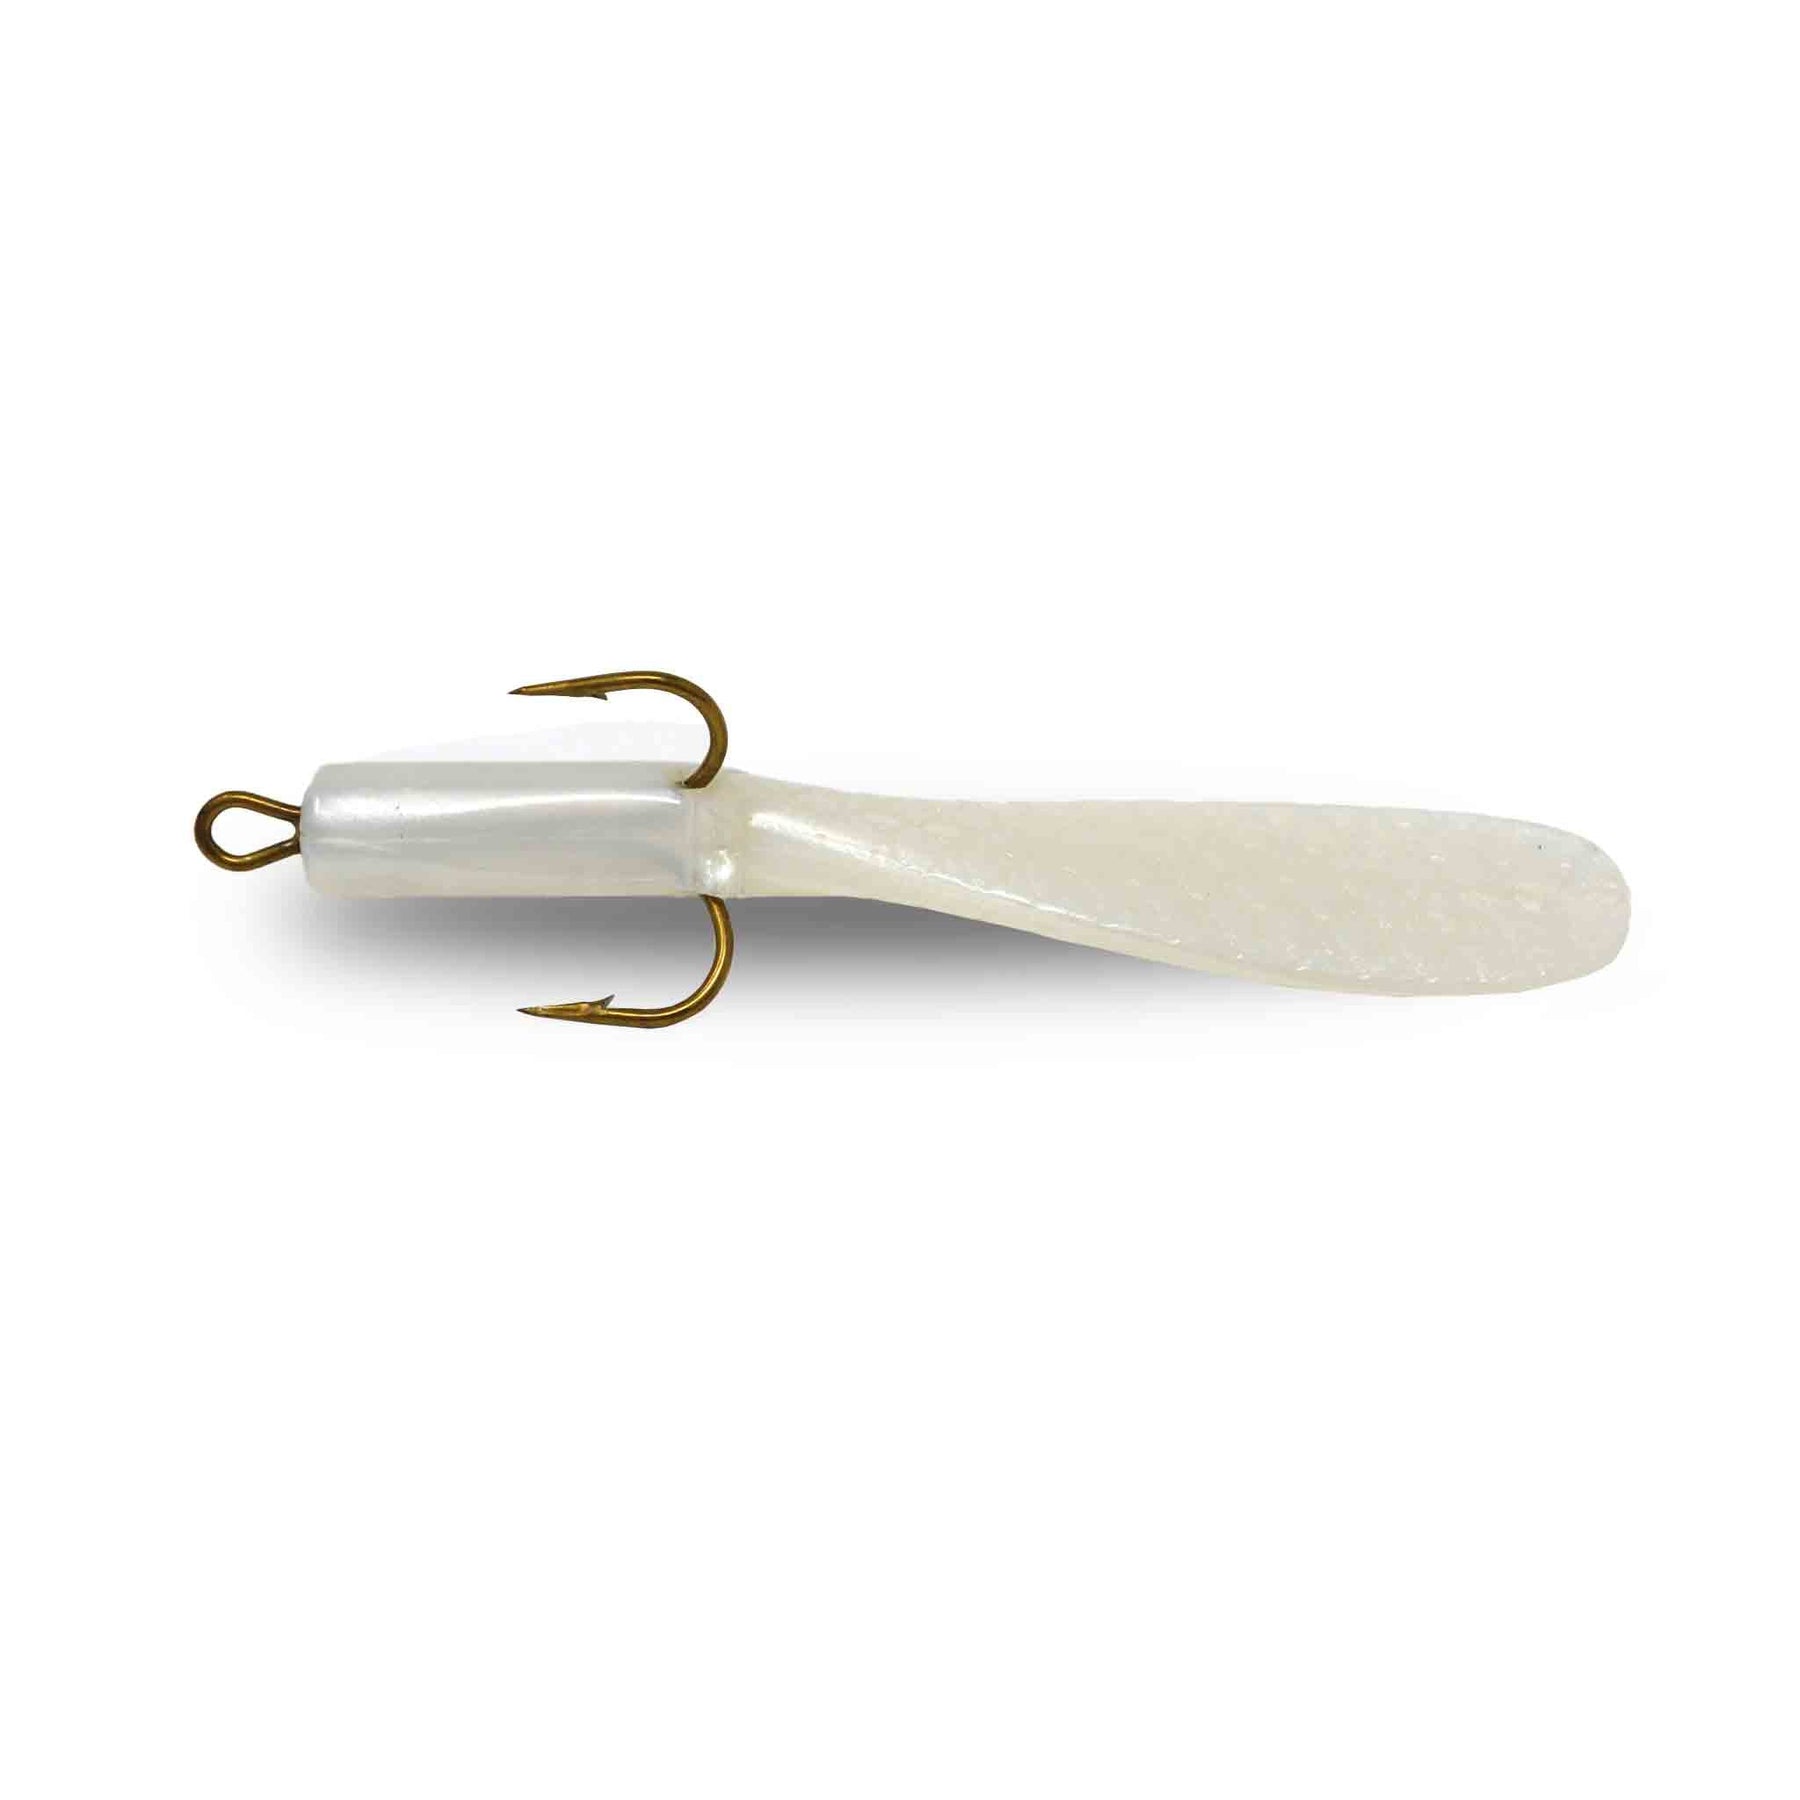 Beaver's Baits Baby Beaver XL Tail White Replacement Tails